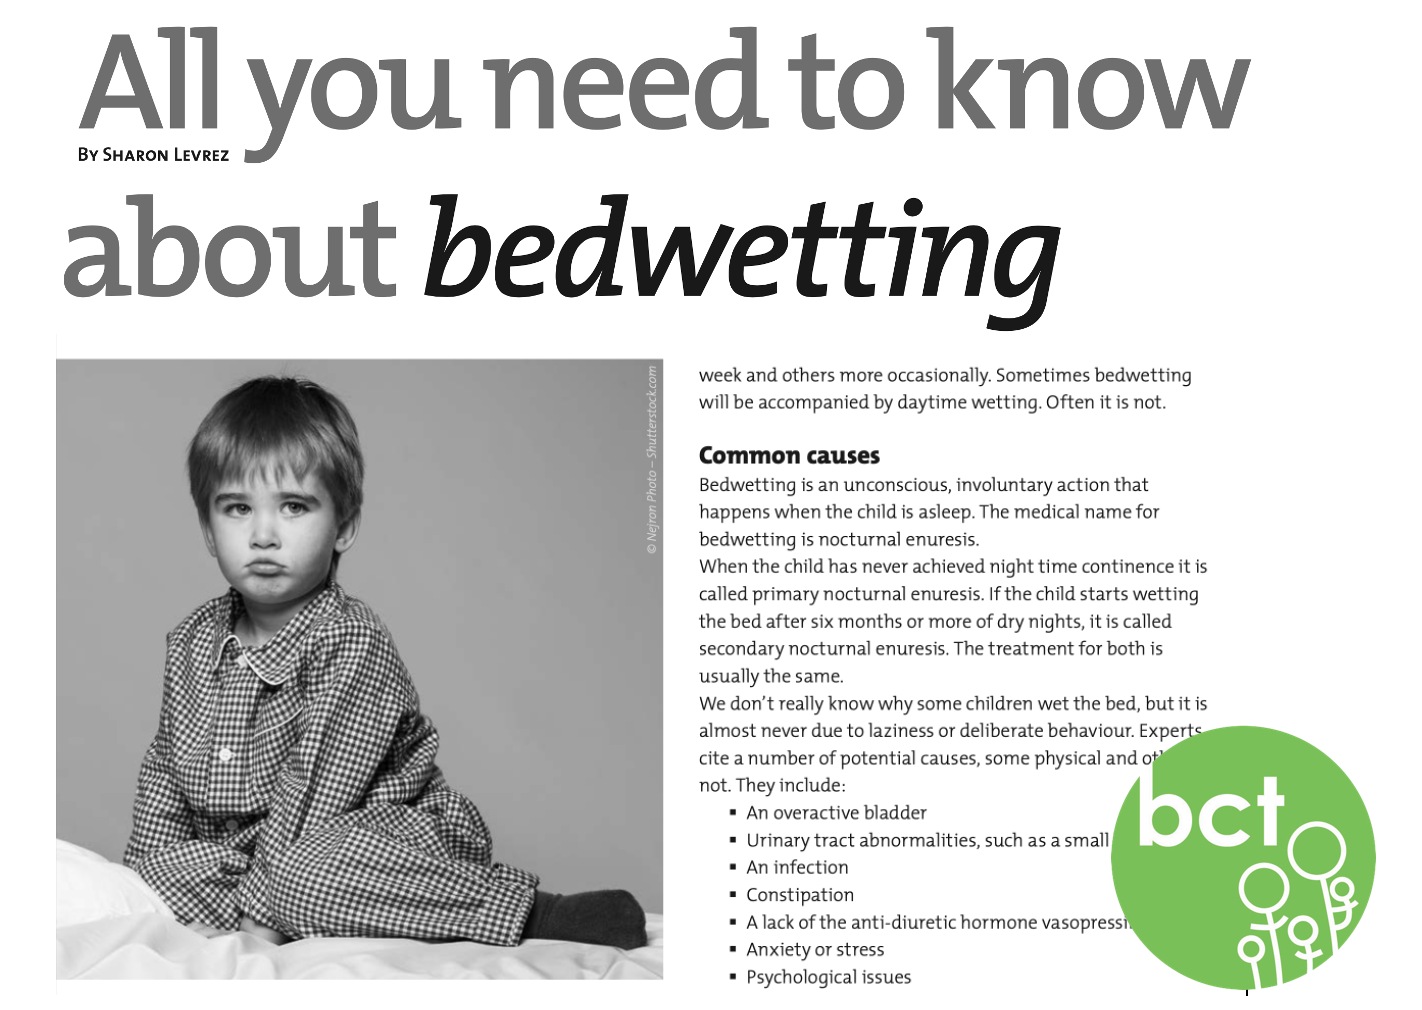 All you need to know about bedwetting